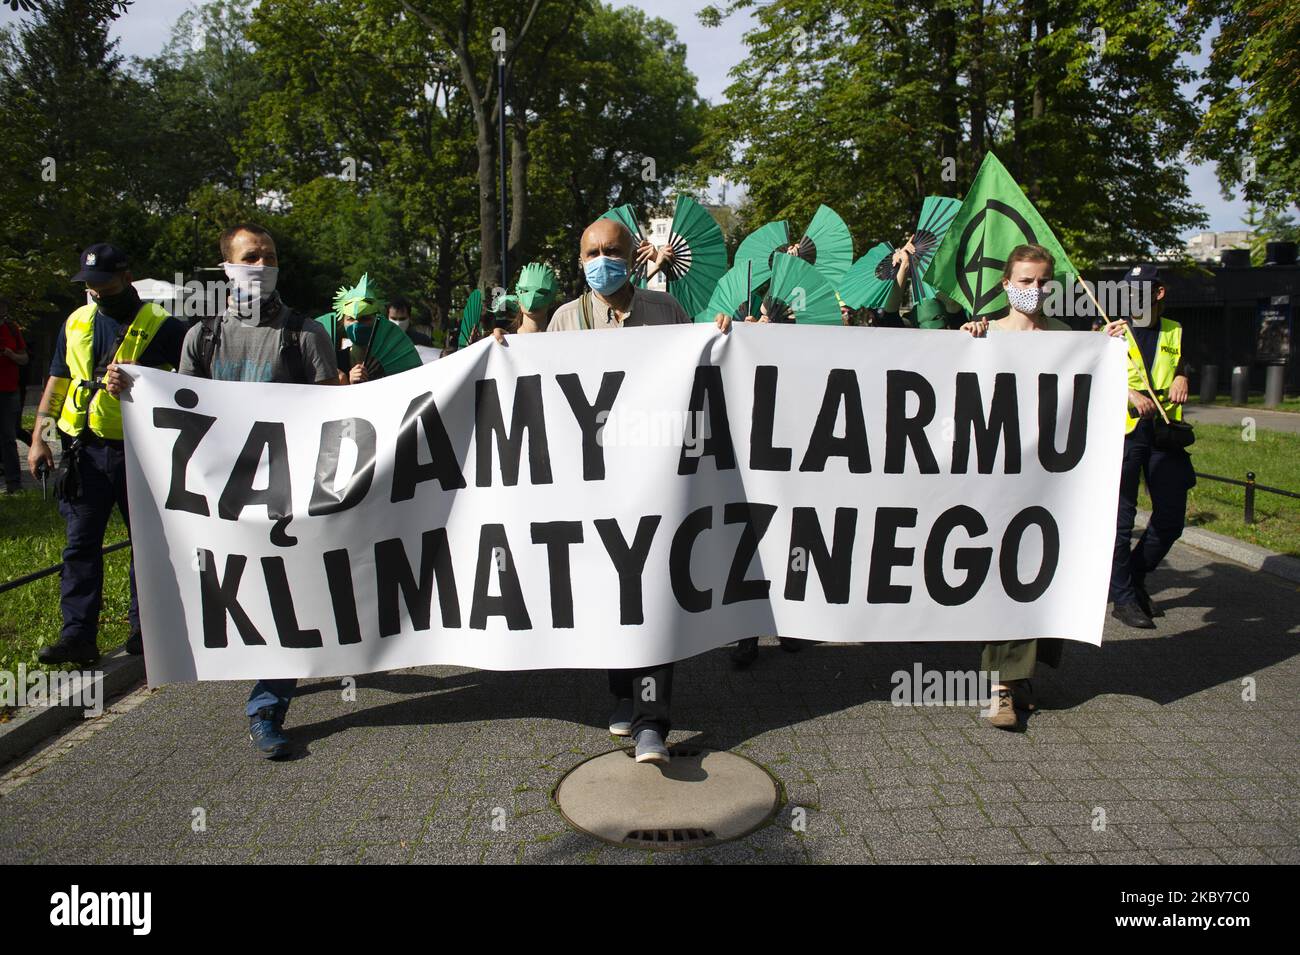 Demonstrators hold a banner that reads 'We demand climatic alarm' on September 5, 2020 in Warsaw, Poland. A few thousand people took the streets in the great march for climate organised by Extinction Rebellion as the start of the climate protests season to demand immediate action from the politics and to raise awareness about climate changes. (Photo by Aleksander Kalka/NurPhoto) Stock Photo